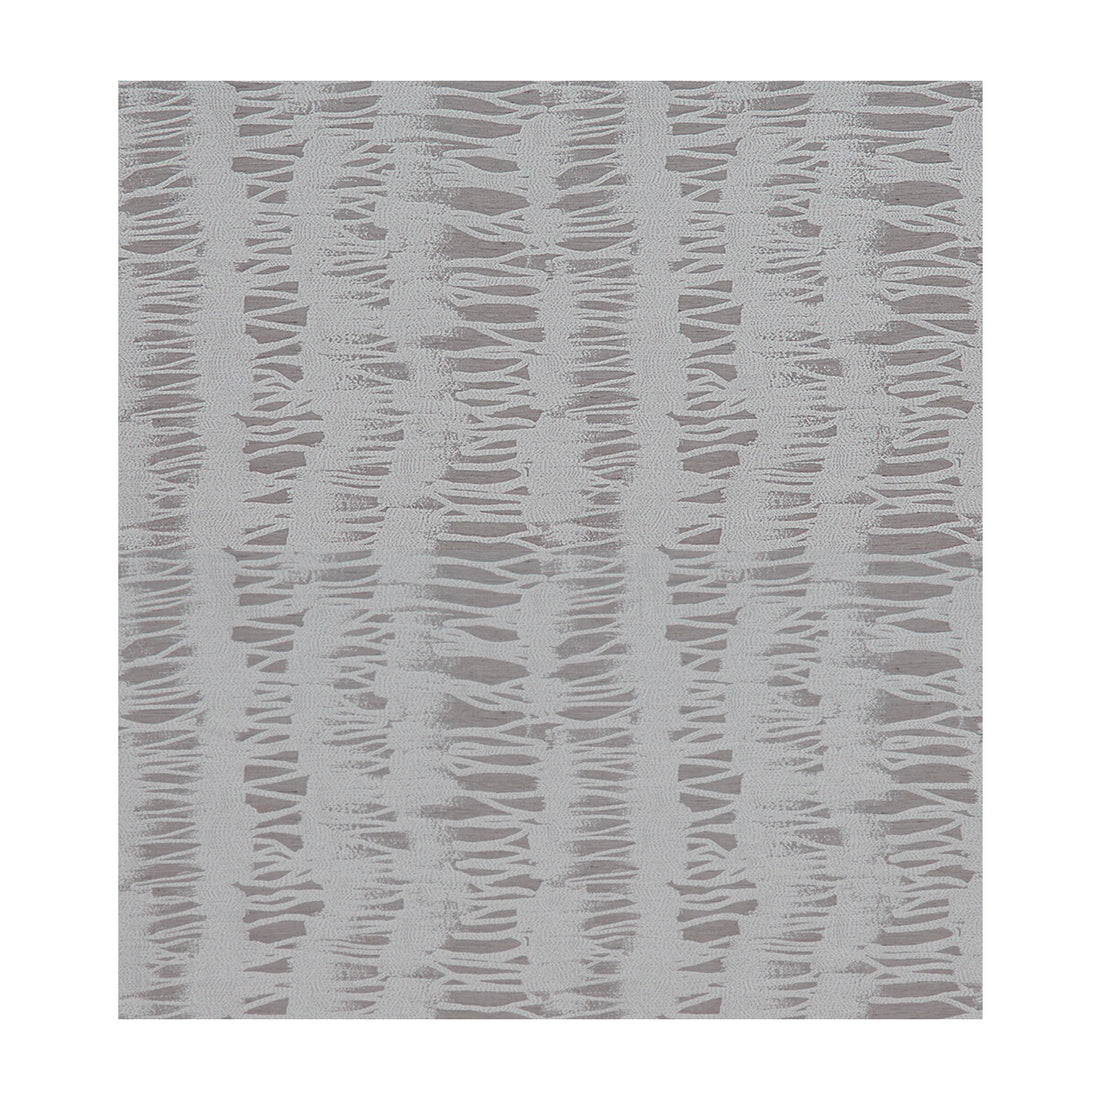 Albizia fabric in pebble color - pattern 34141.11.0 - by Kravet Design in the Candice Olson collection